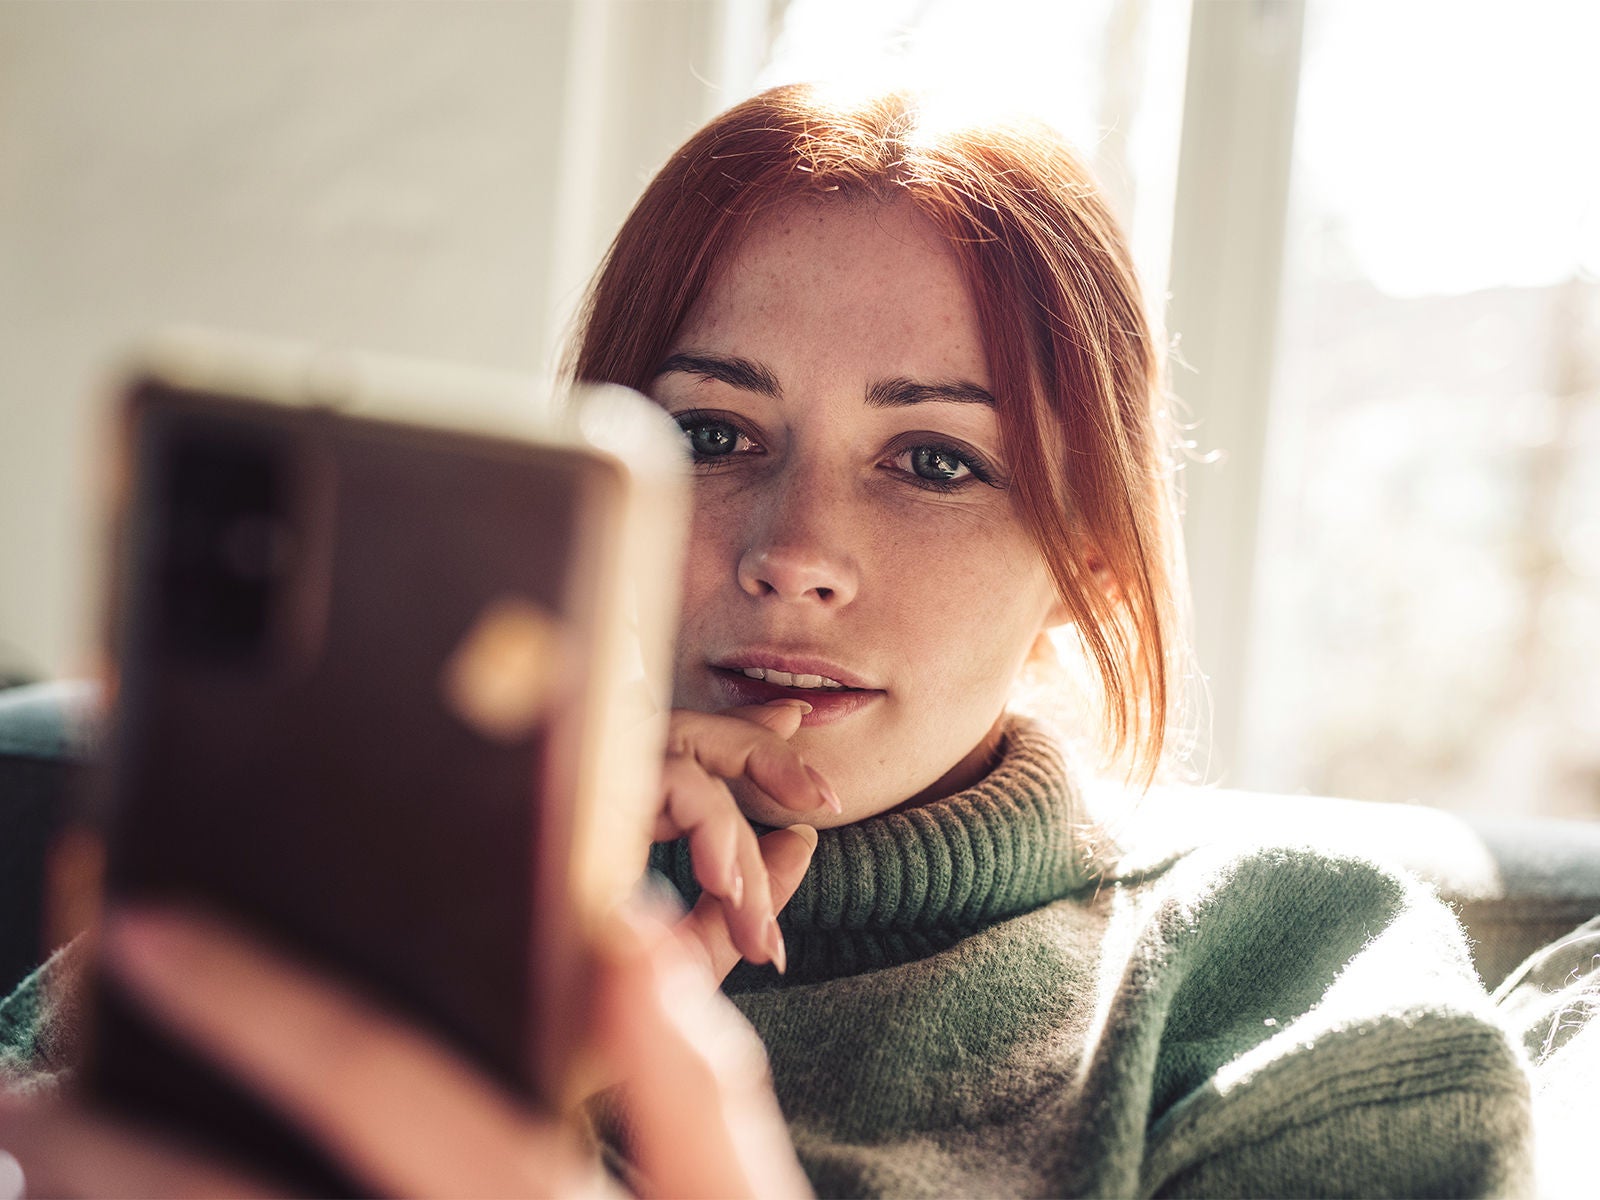 A woman pondering while looking closely at the smartphone held in her hand.